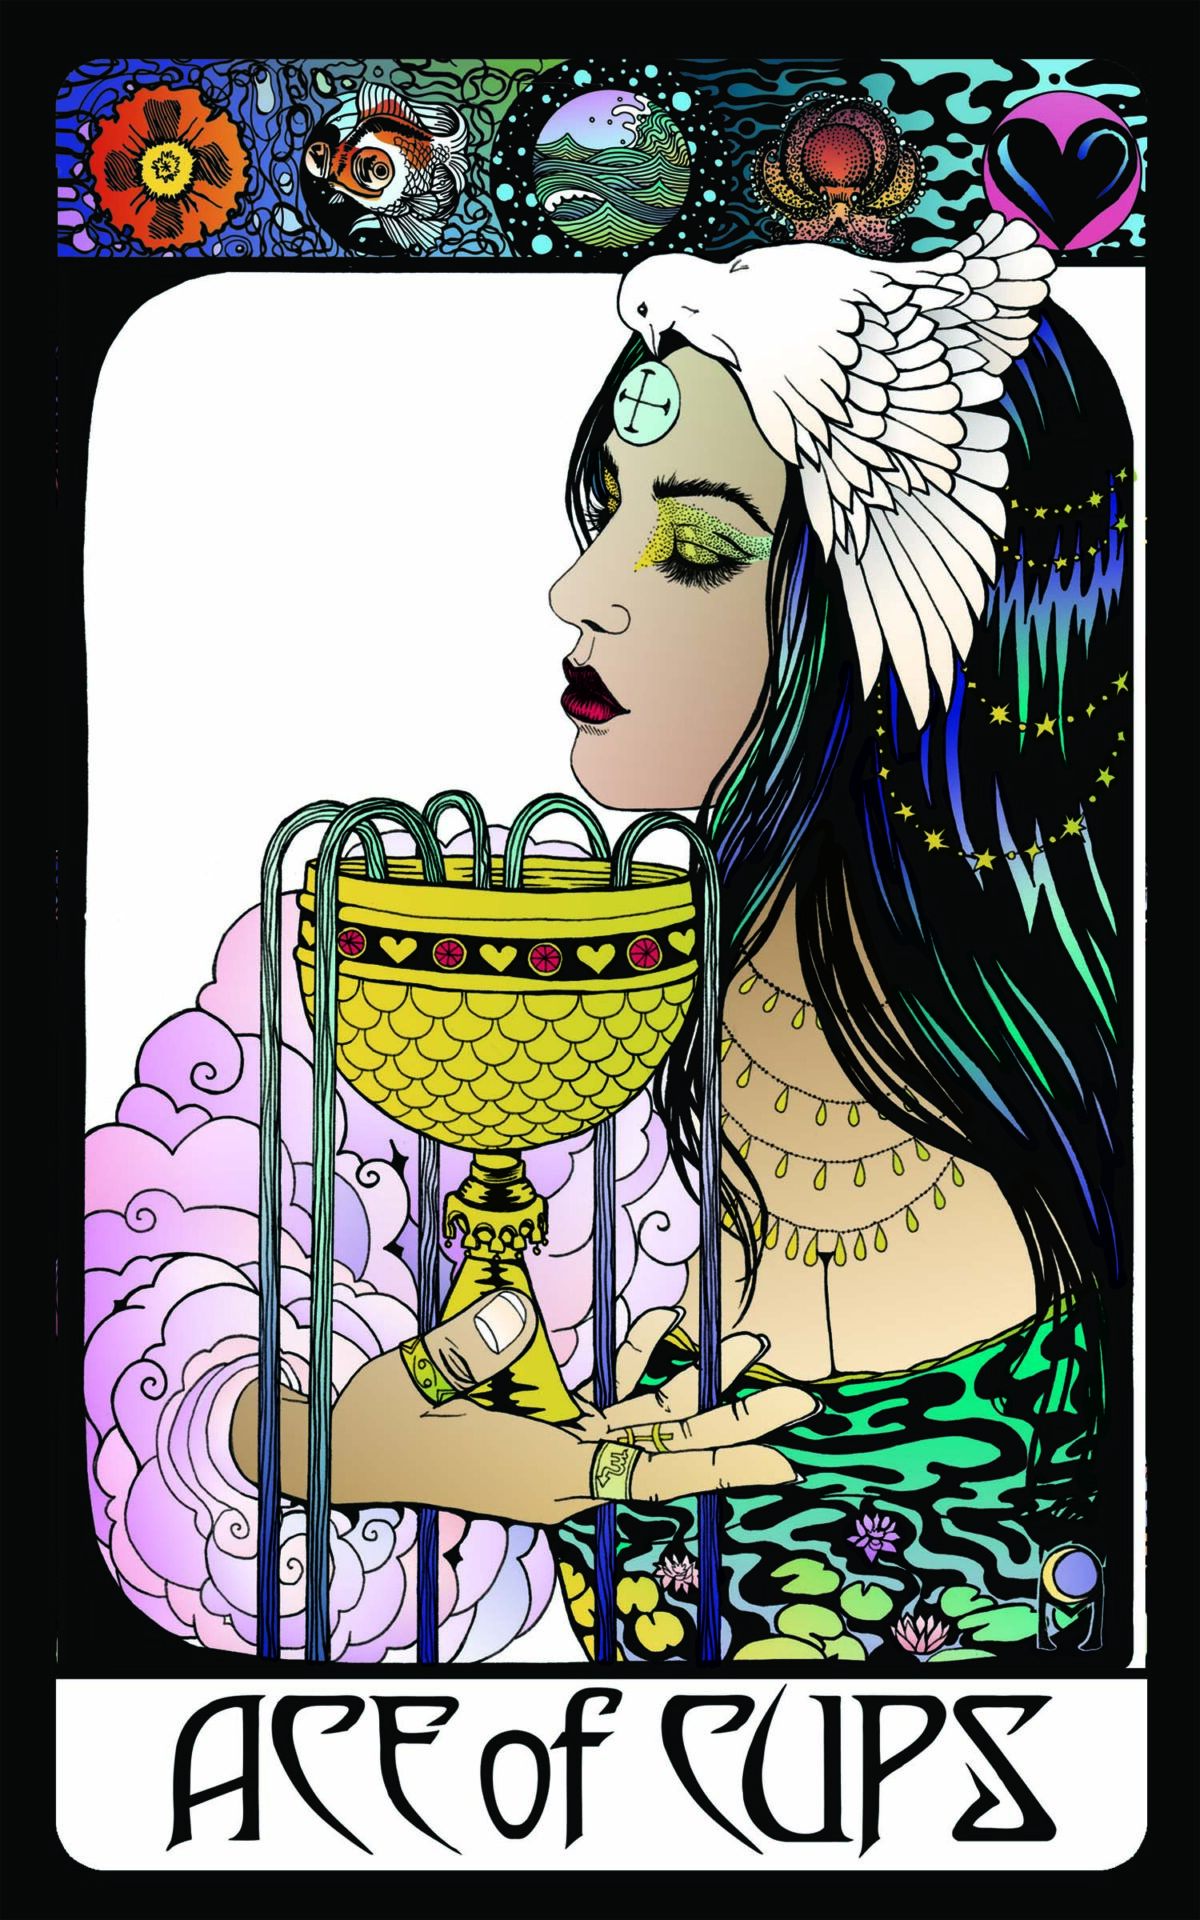 The 4th Edition of the Tarot is in production! Look forward to a late spring/early summer release.